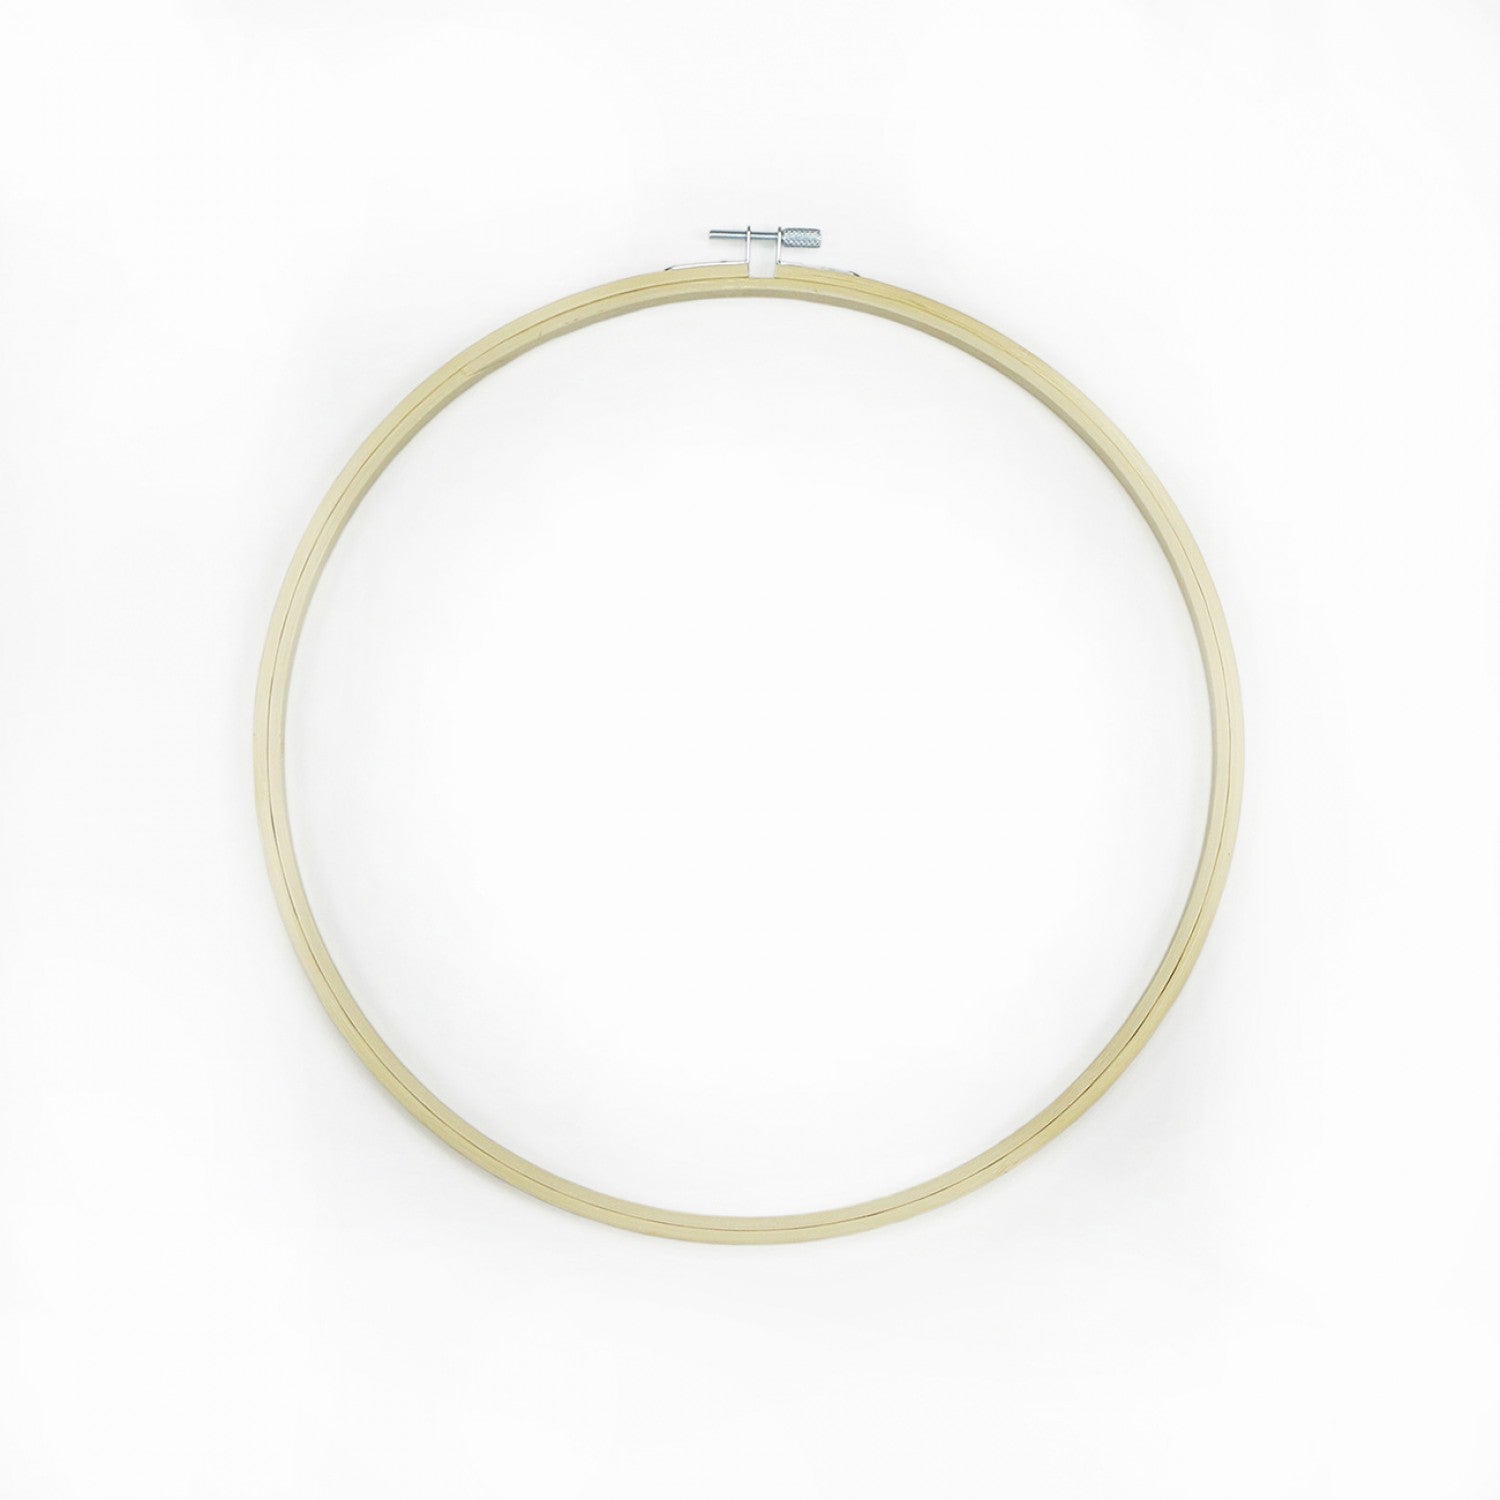 DMC Bamboo Embroidery Hoop - 12 inches